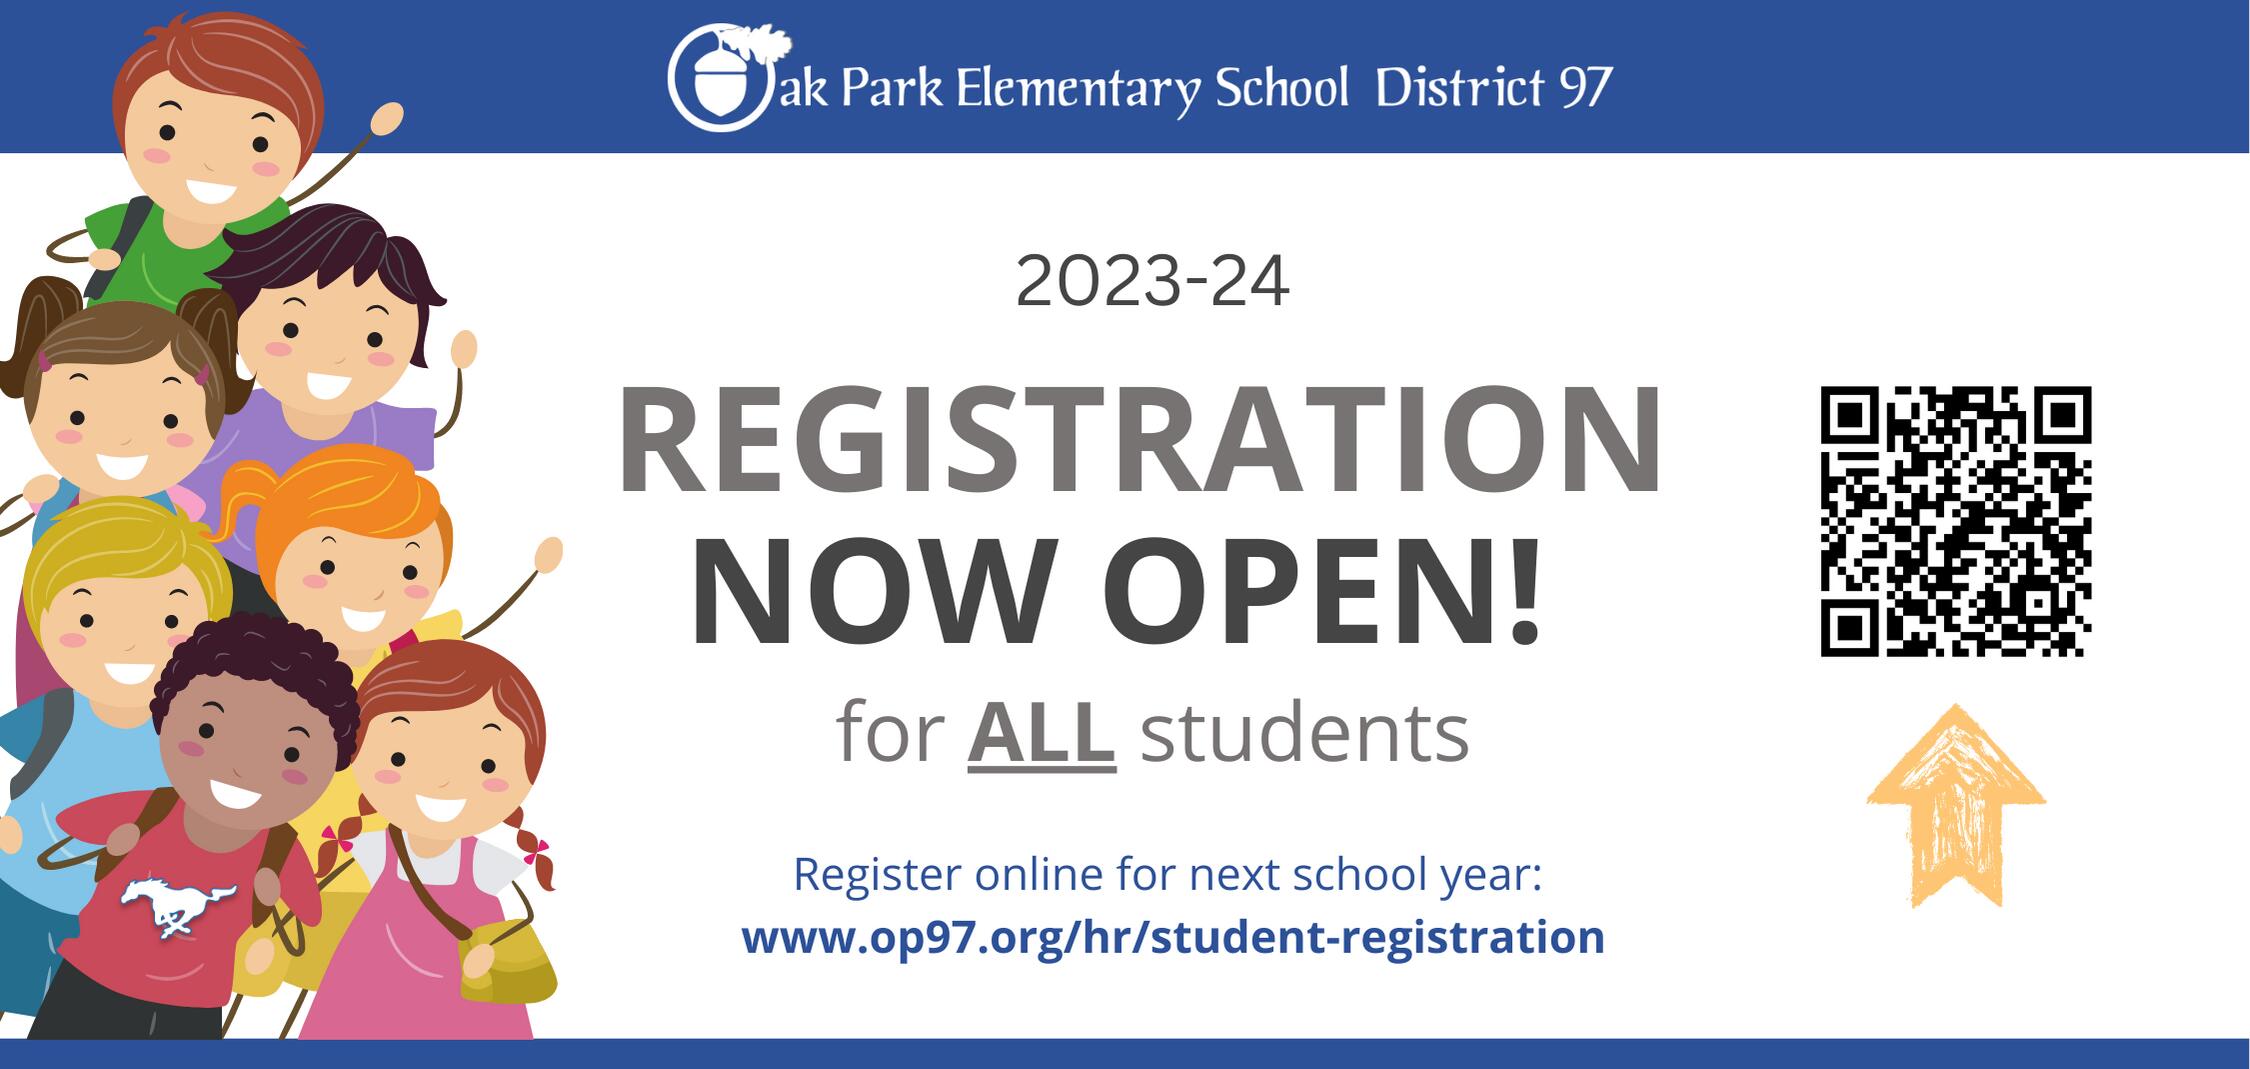 Registration Now Open for All Students!